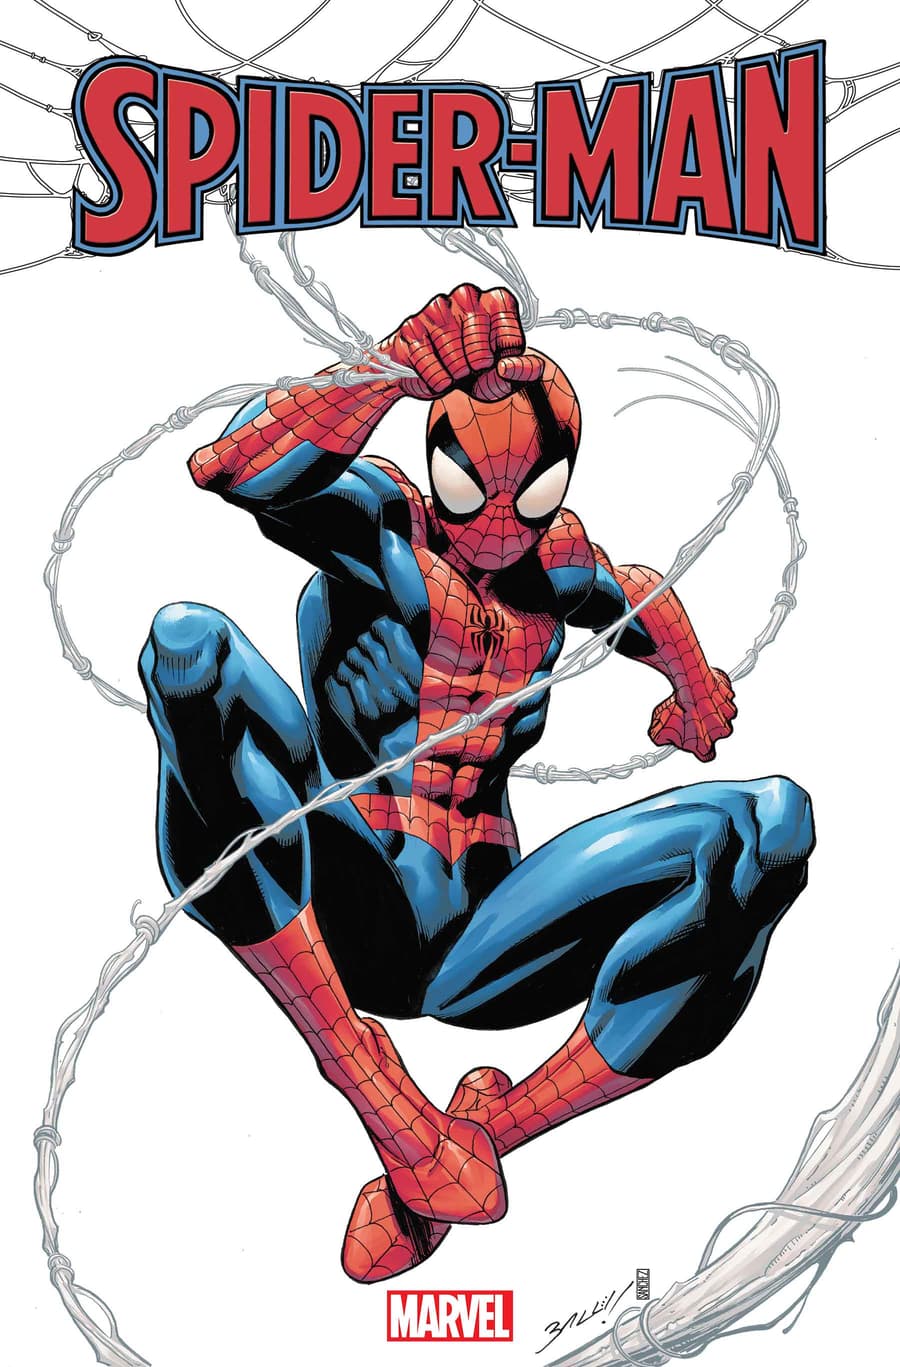 SPIDER-MAN #1 cover by Mark Bagley